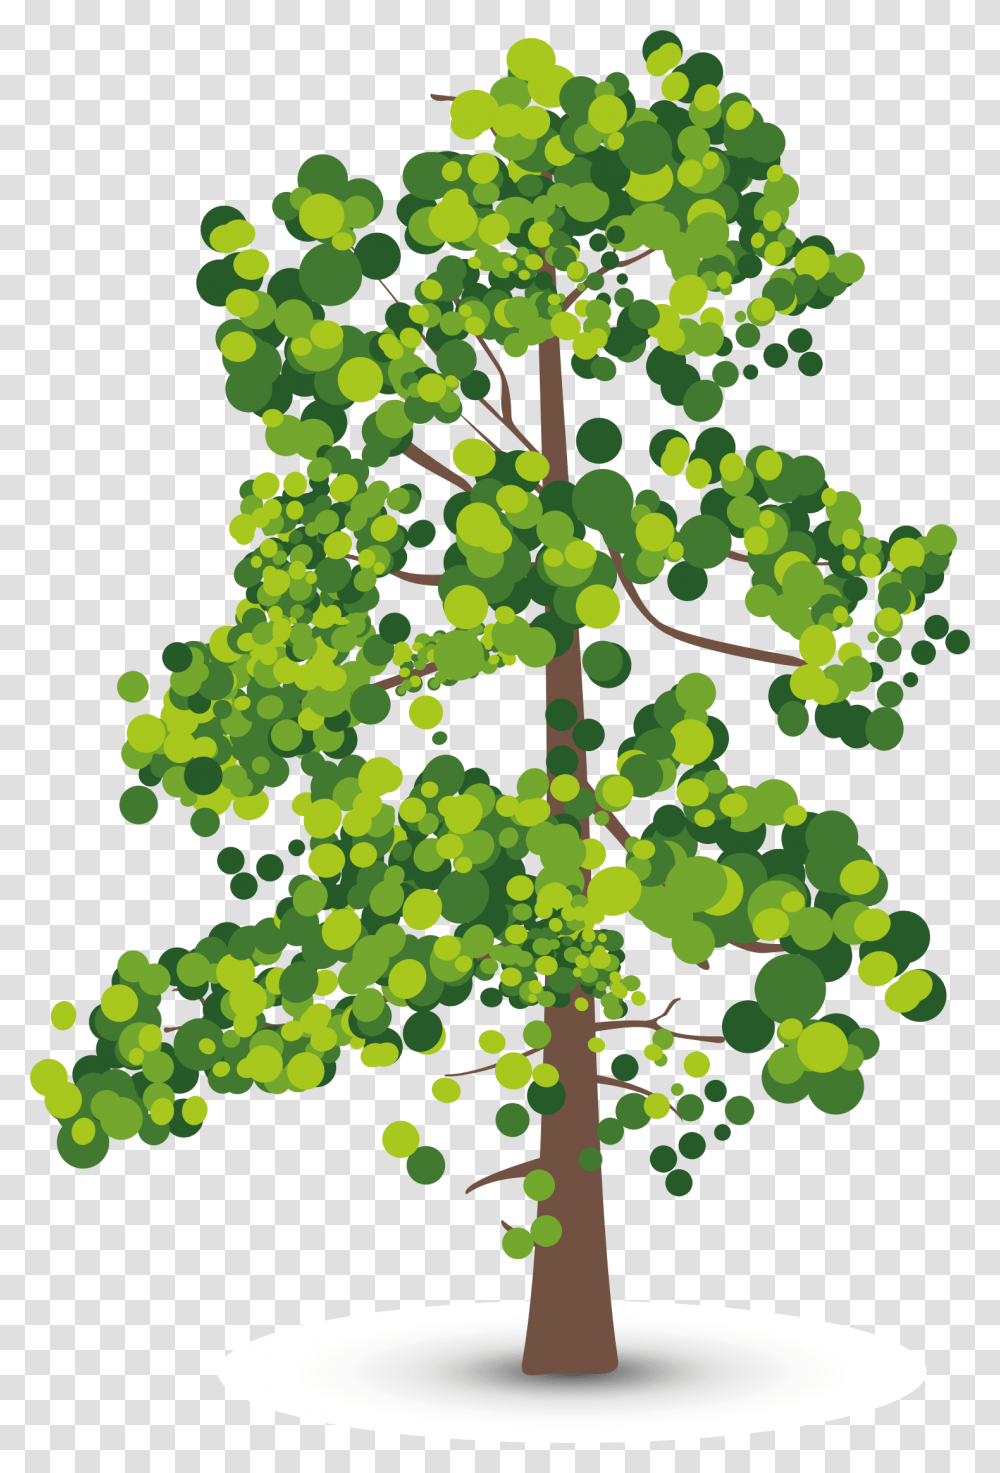 Aspen Tree Creative Perspective Olive Leaf Shadow Clipart Lidar Number Of Returns, Plant, Oak, Sycamore, Maple Transparent Png